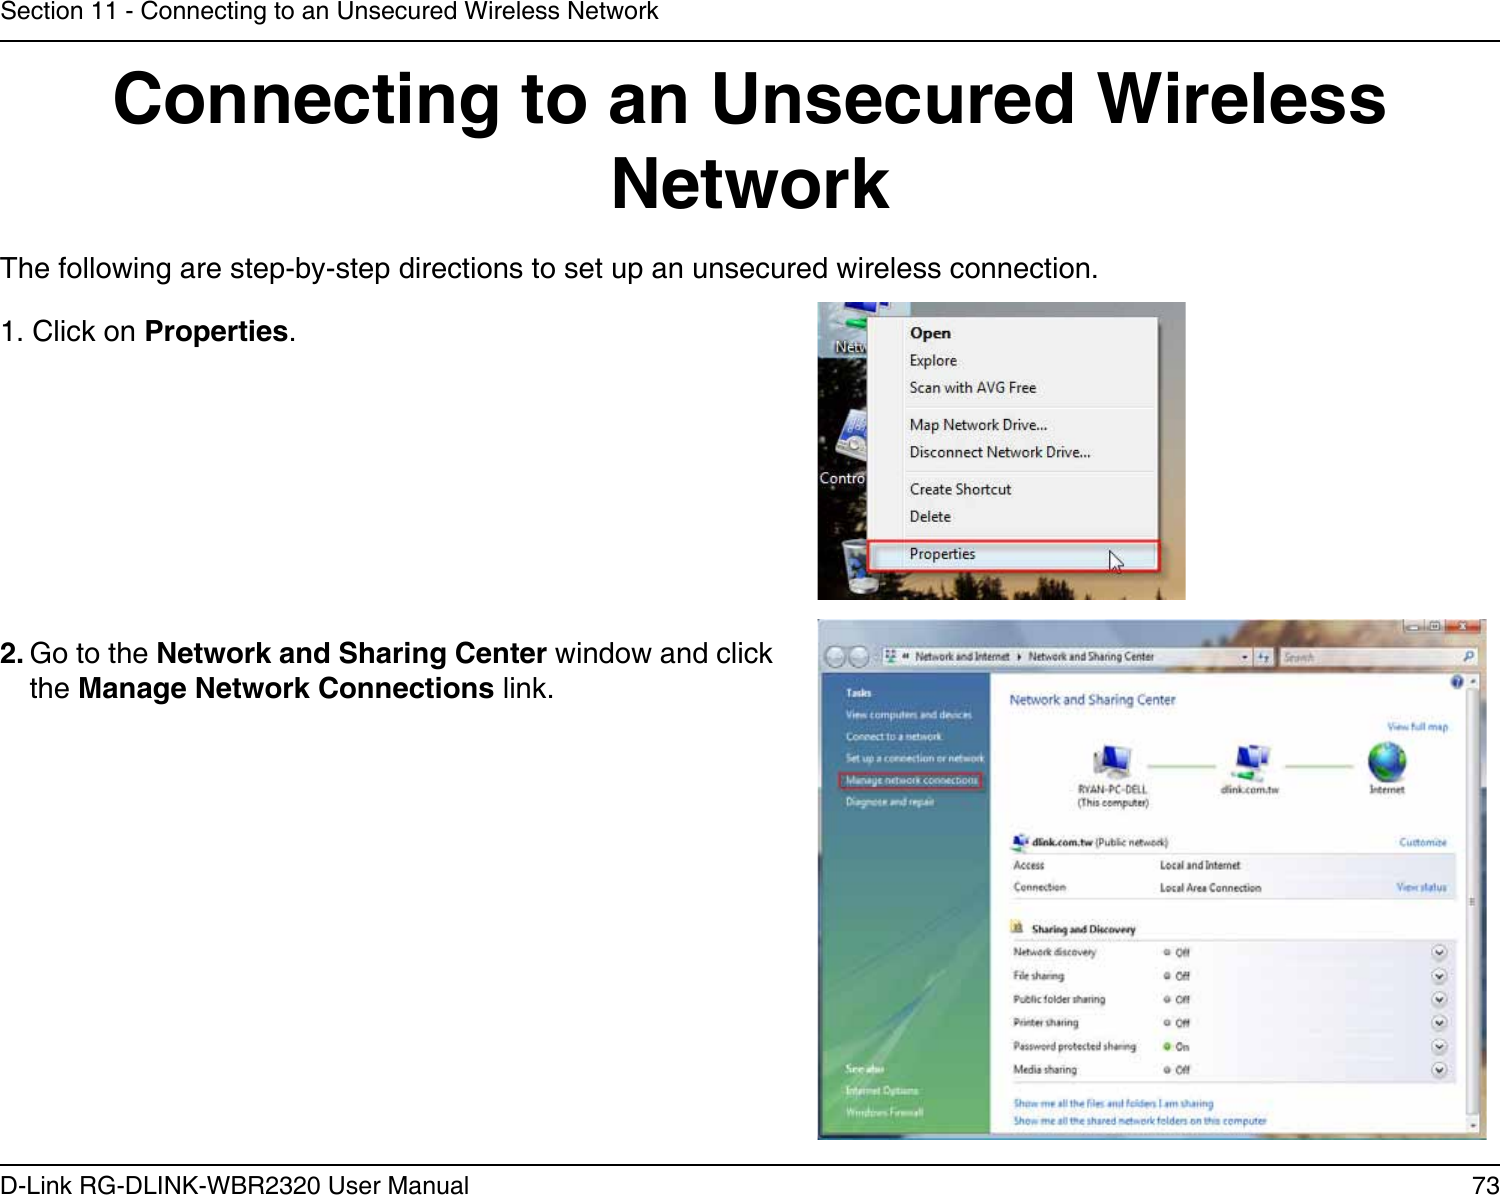 73D-Link RG-DLINK-WBR2320 User ManualSection 11 - Connecting to an Unsecured Wireless NetworkConnecting to an Unsecured Wireless NetworkThe following are step-by-step directions to set up an unsecured wireless connection.2. Go to the Network and Sharing Center window and click the Manage Network Connections link. 1. Click on Properties.     